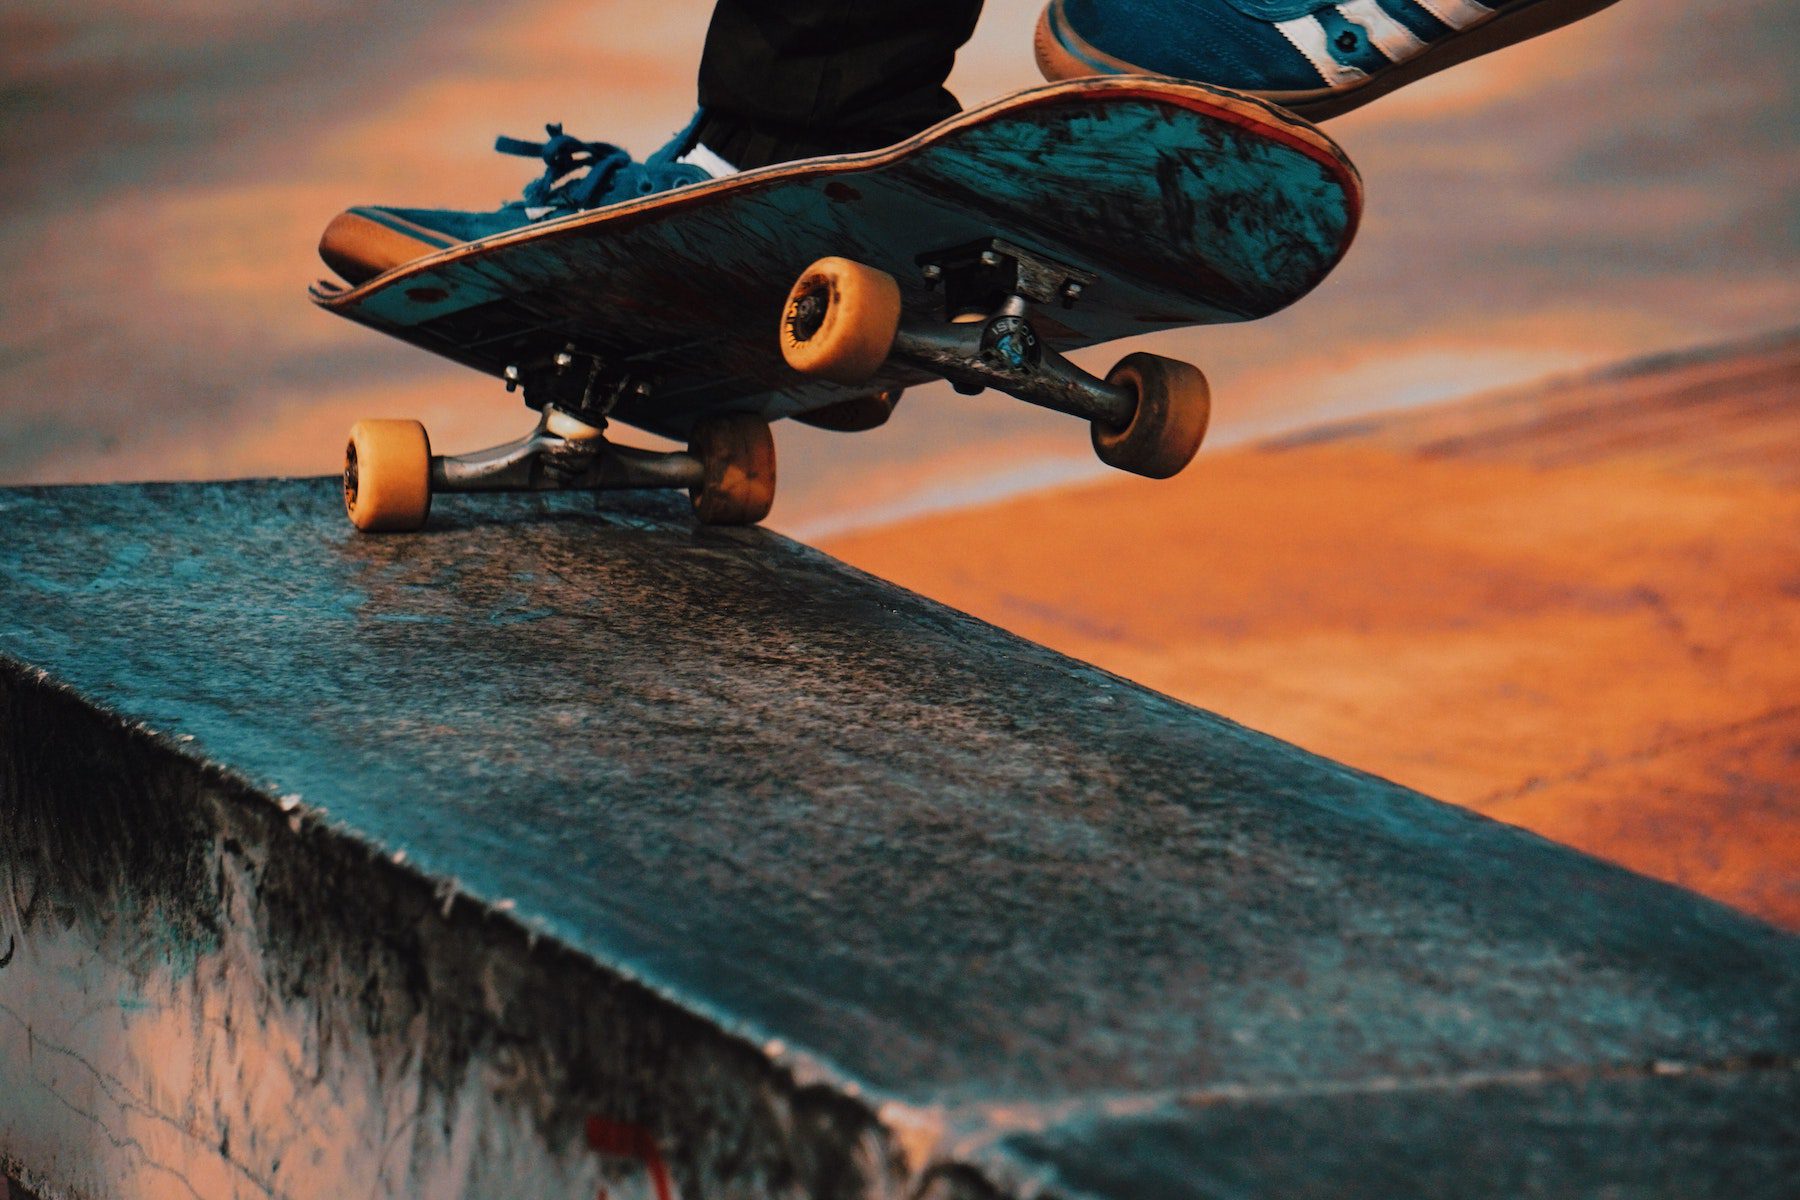 A closeup of a skateboarding performing a trick of grinding on a ledge